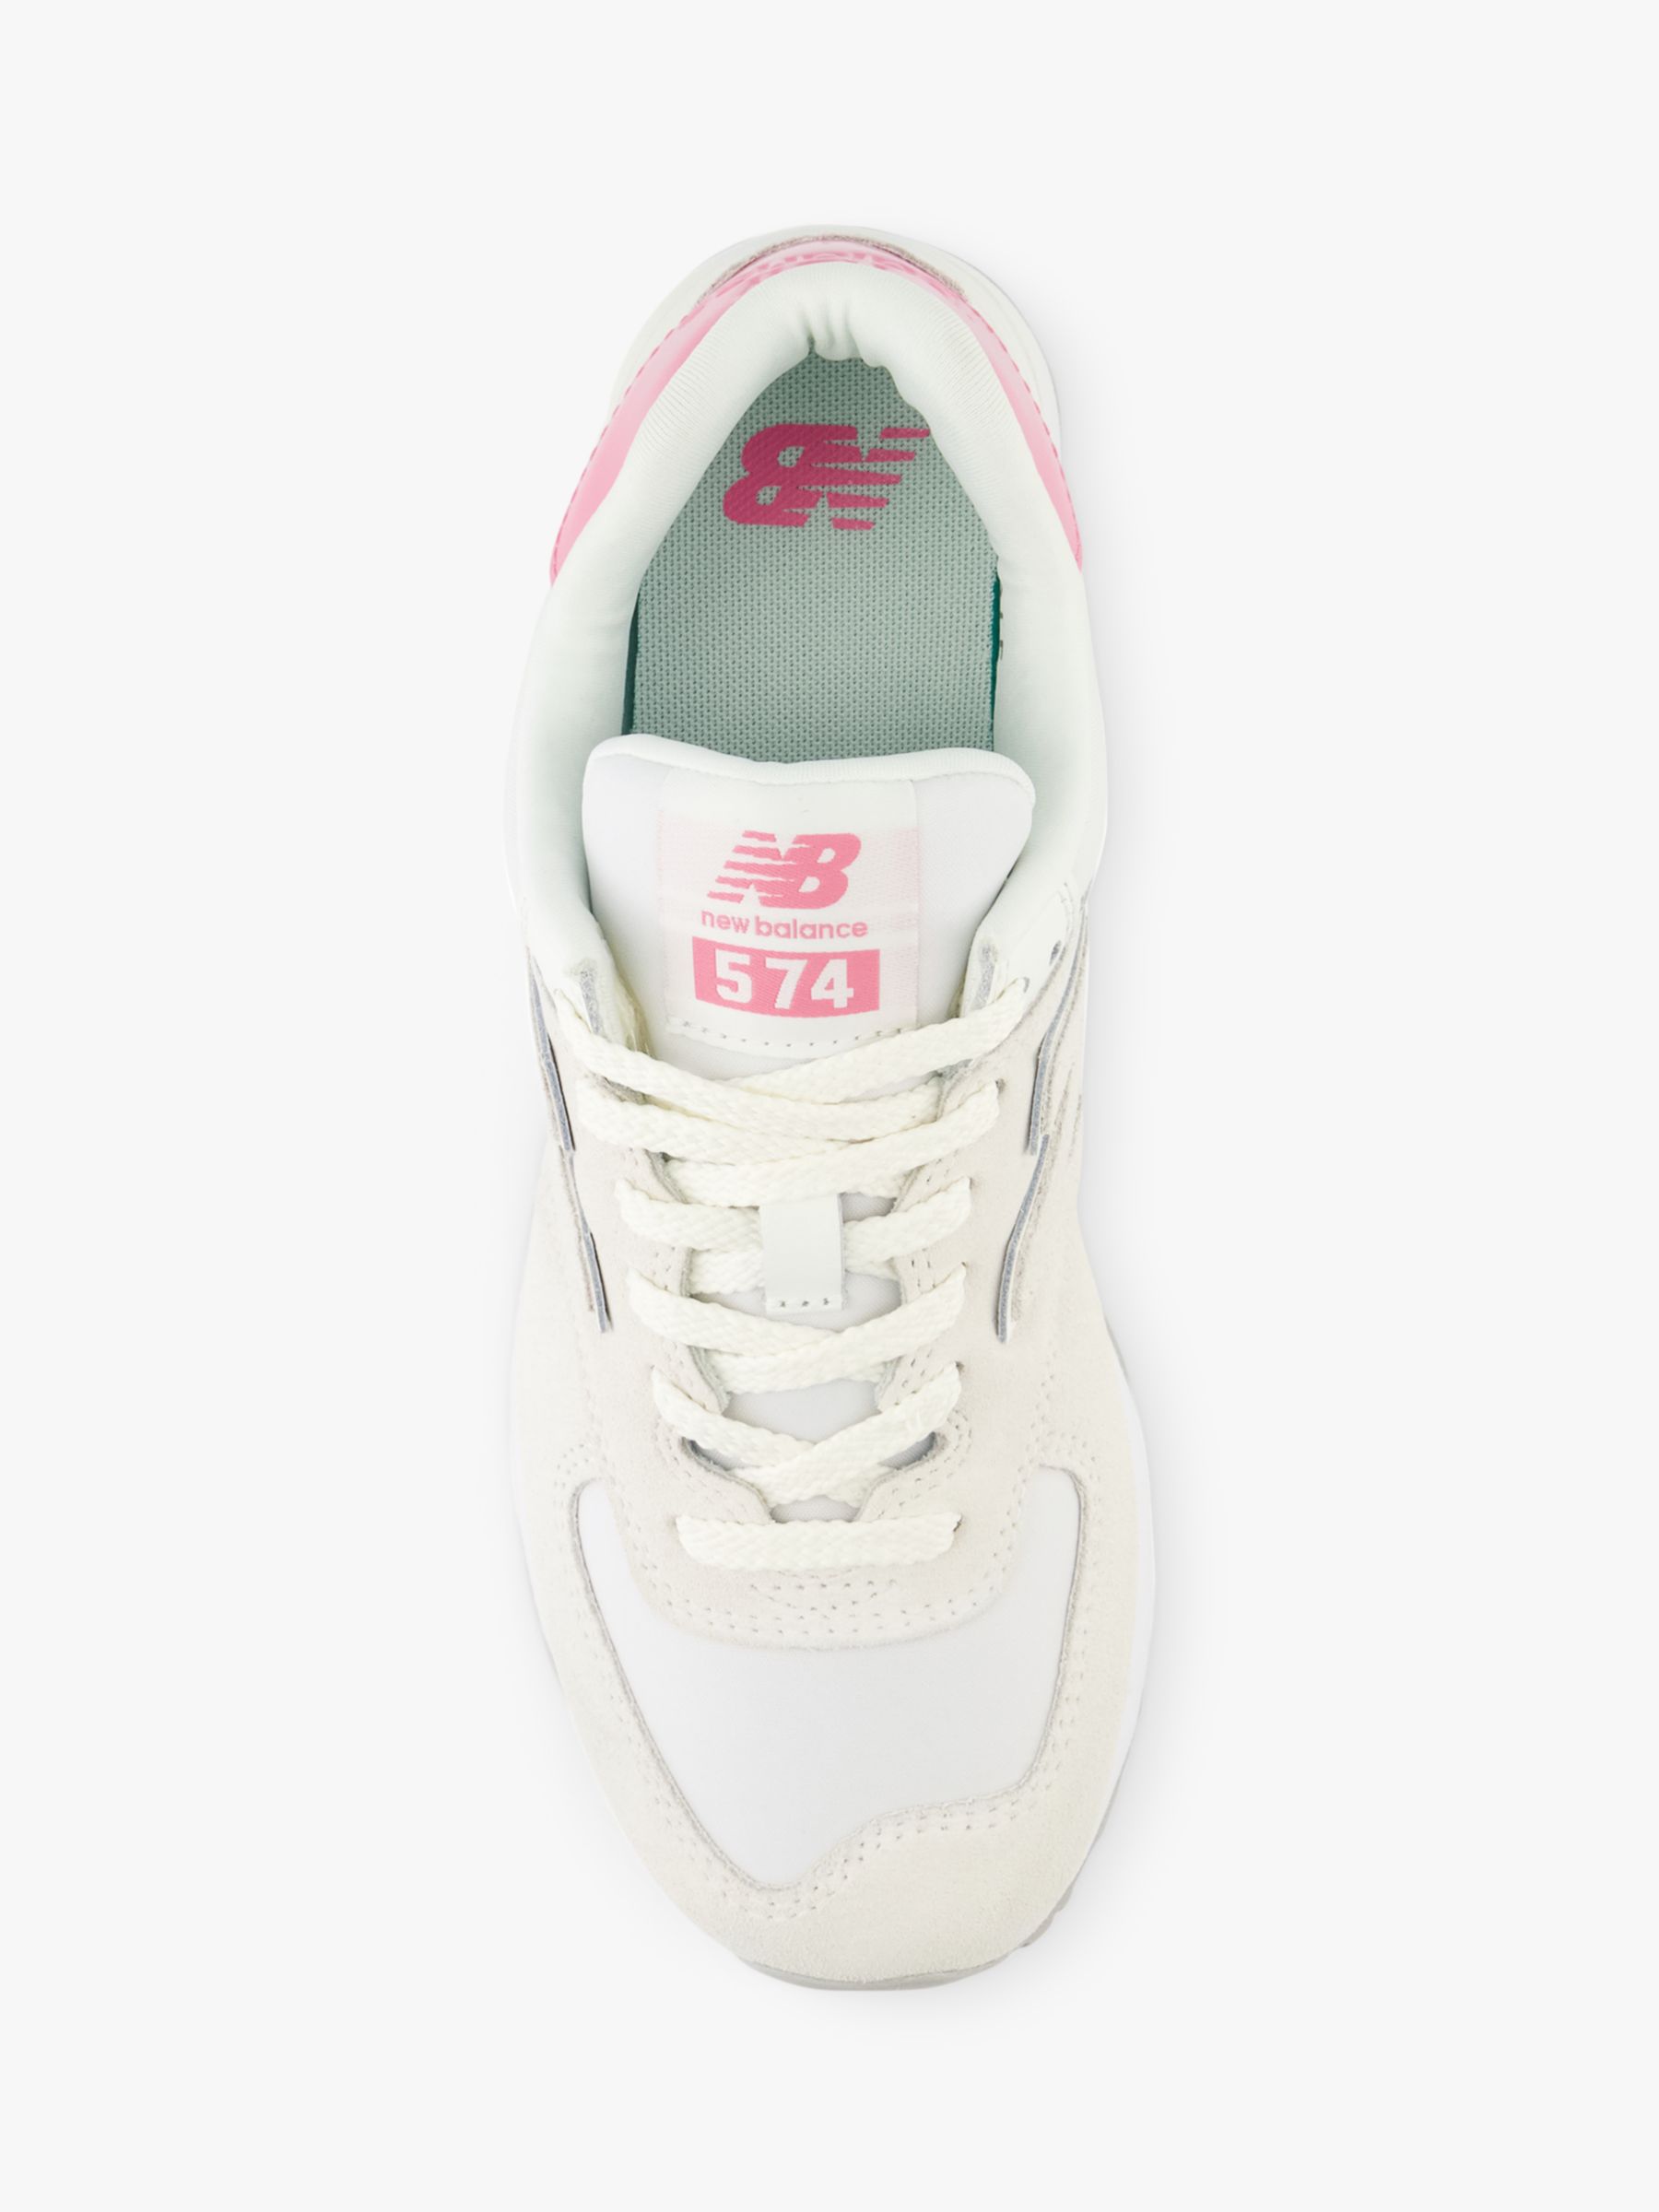 New Balance 574 Suede Blend Trainers, Sea Salt at John Lewis & Partners